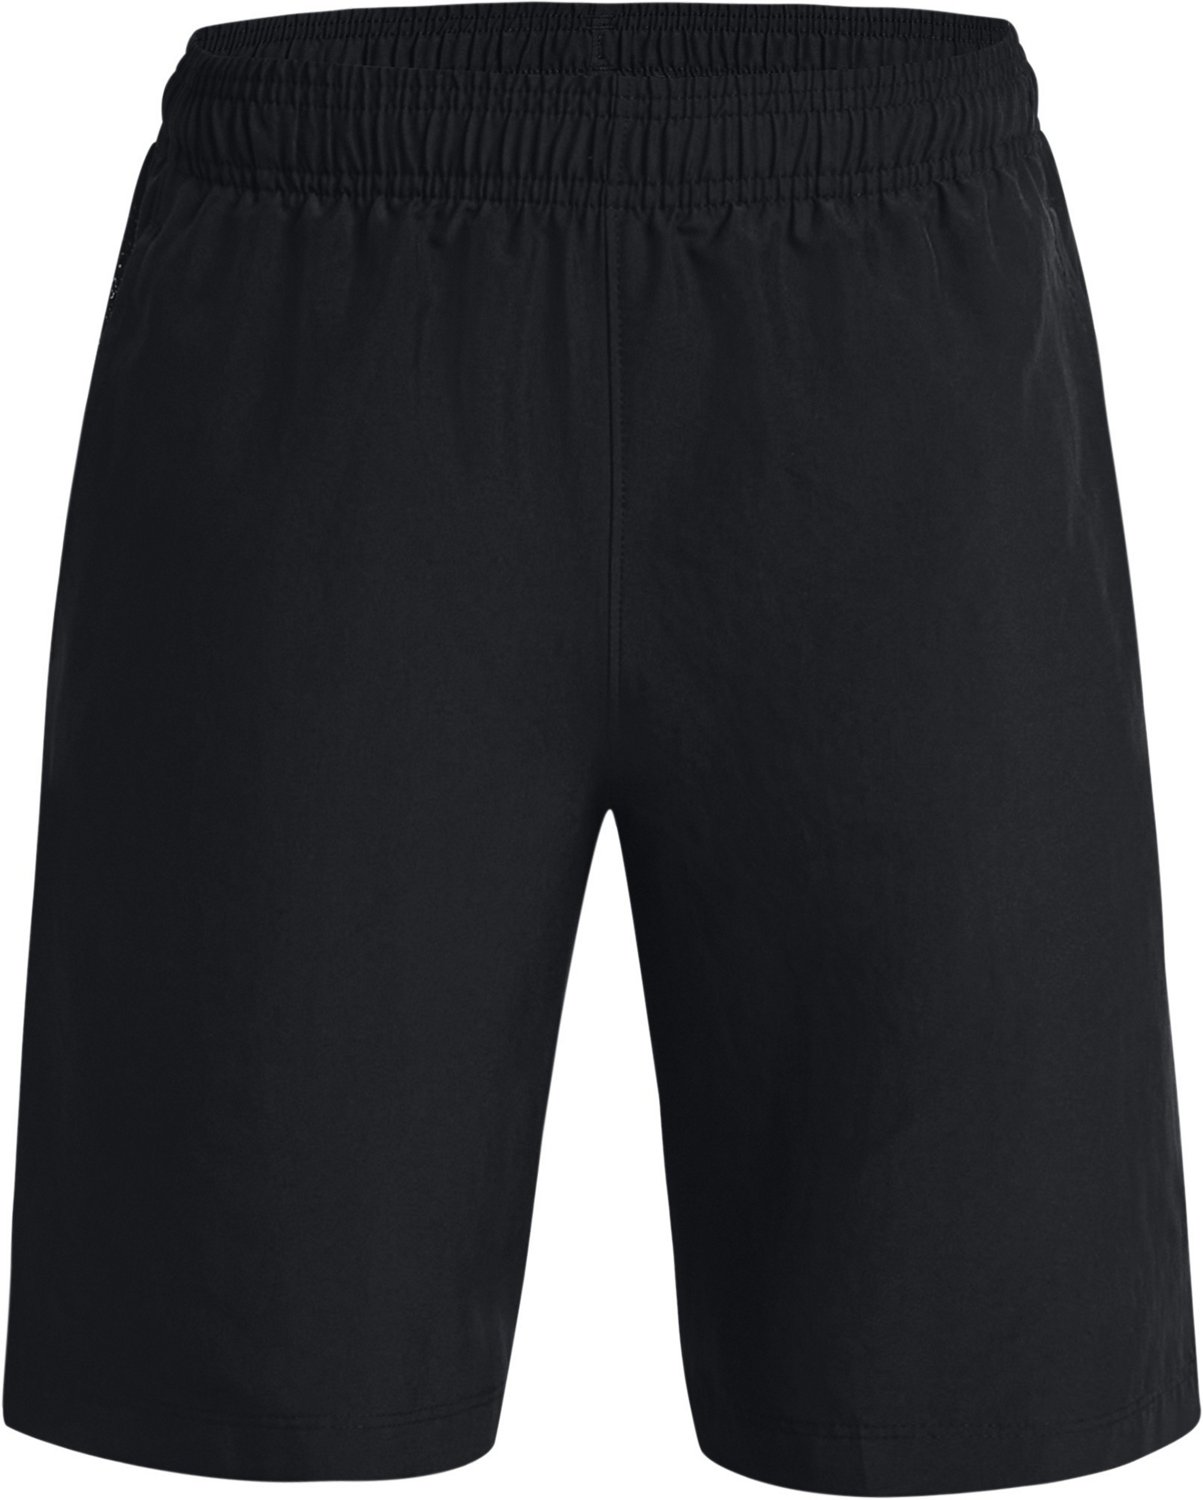 Under Armour Boys Woven Graphic Shorts